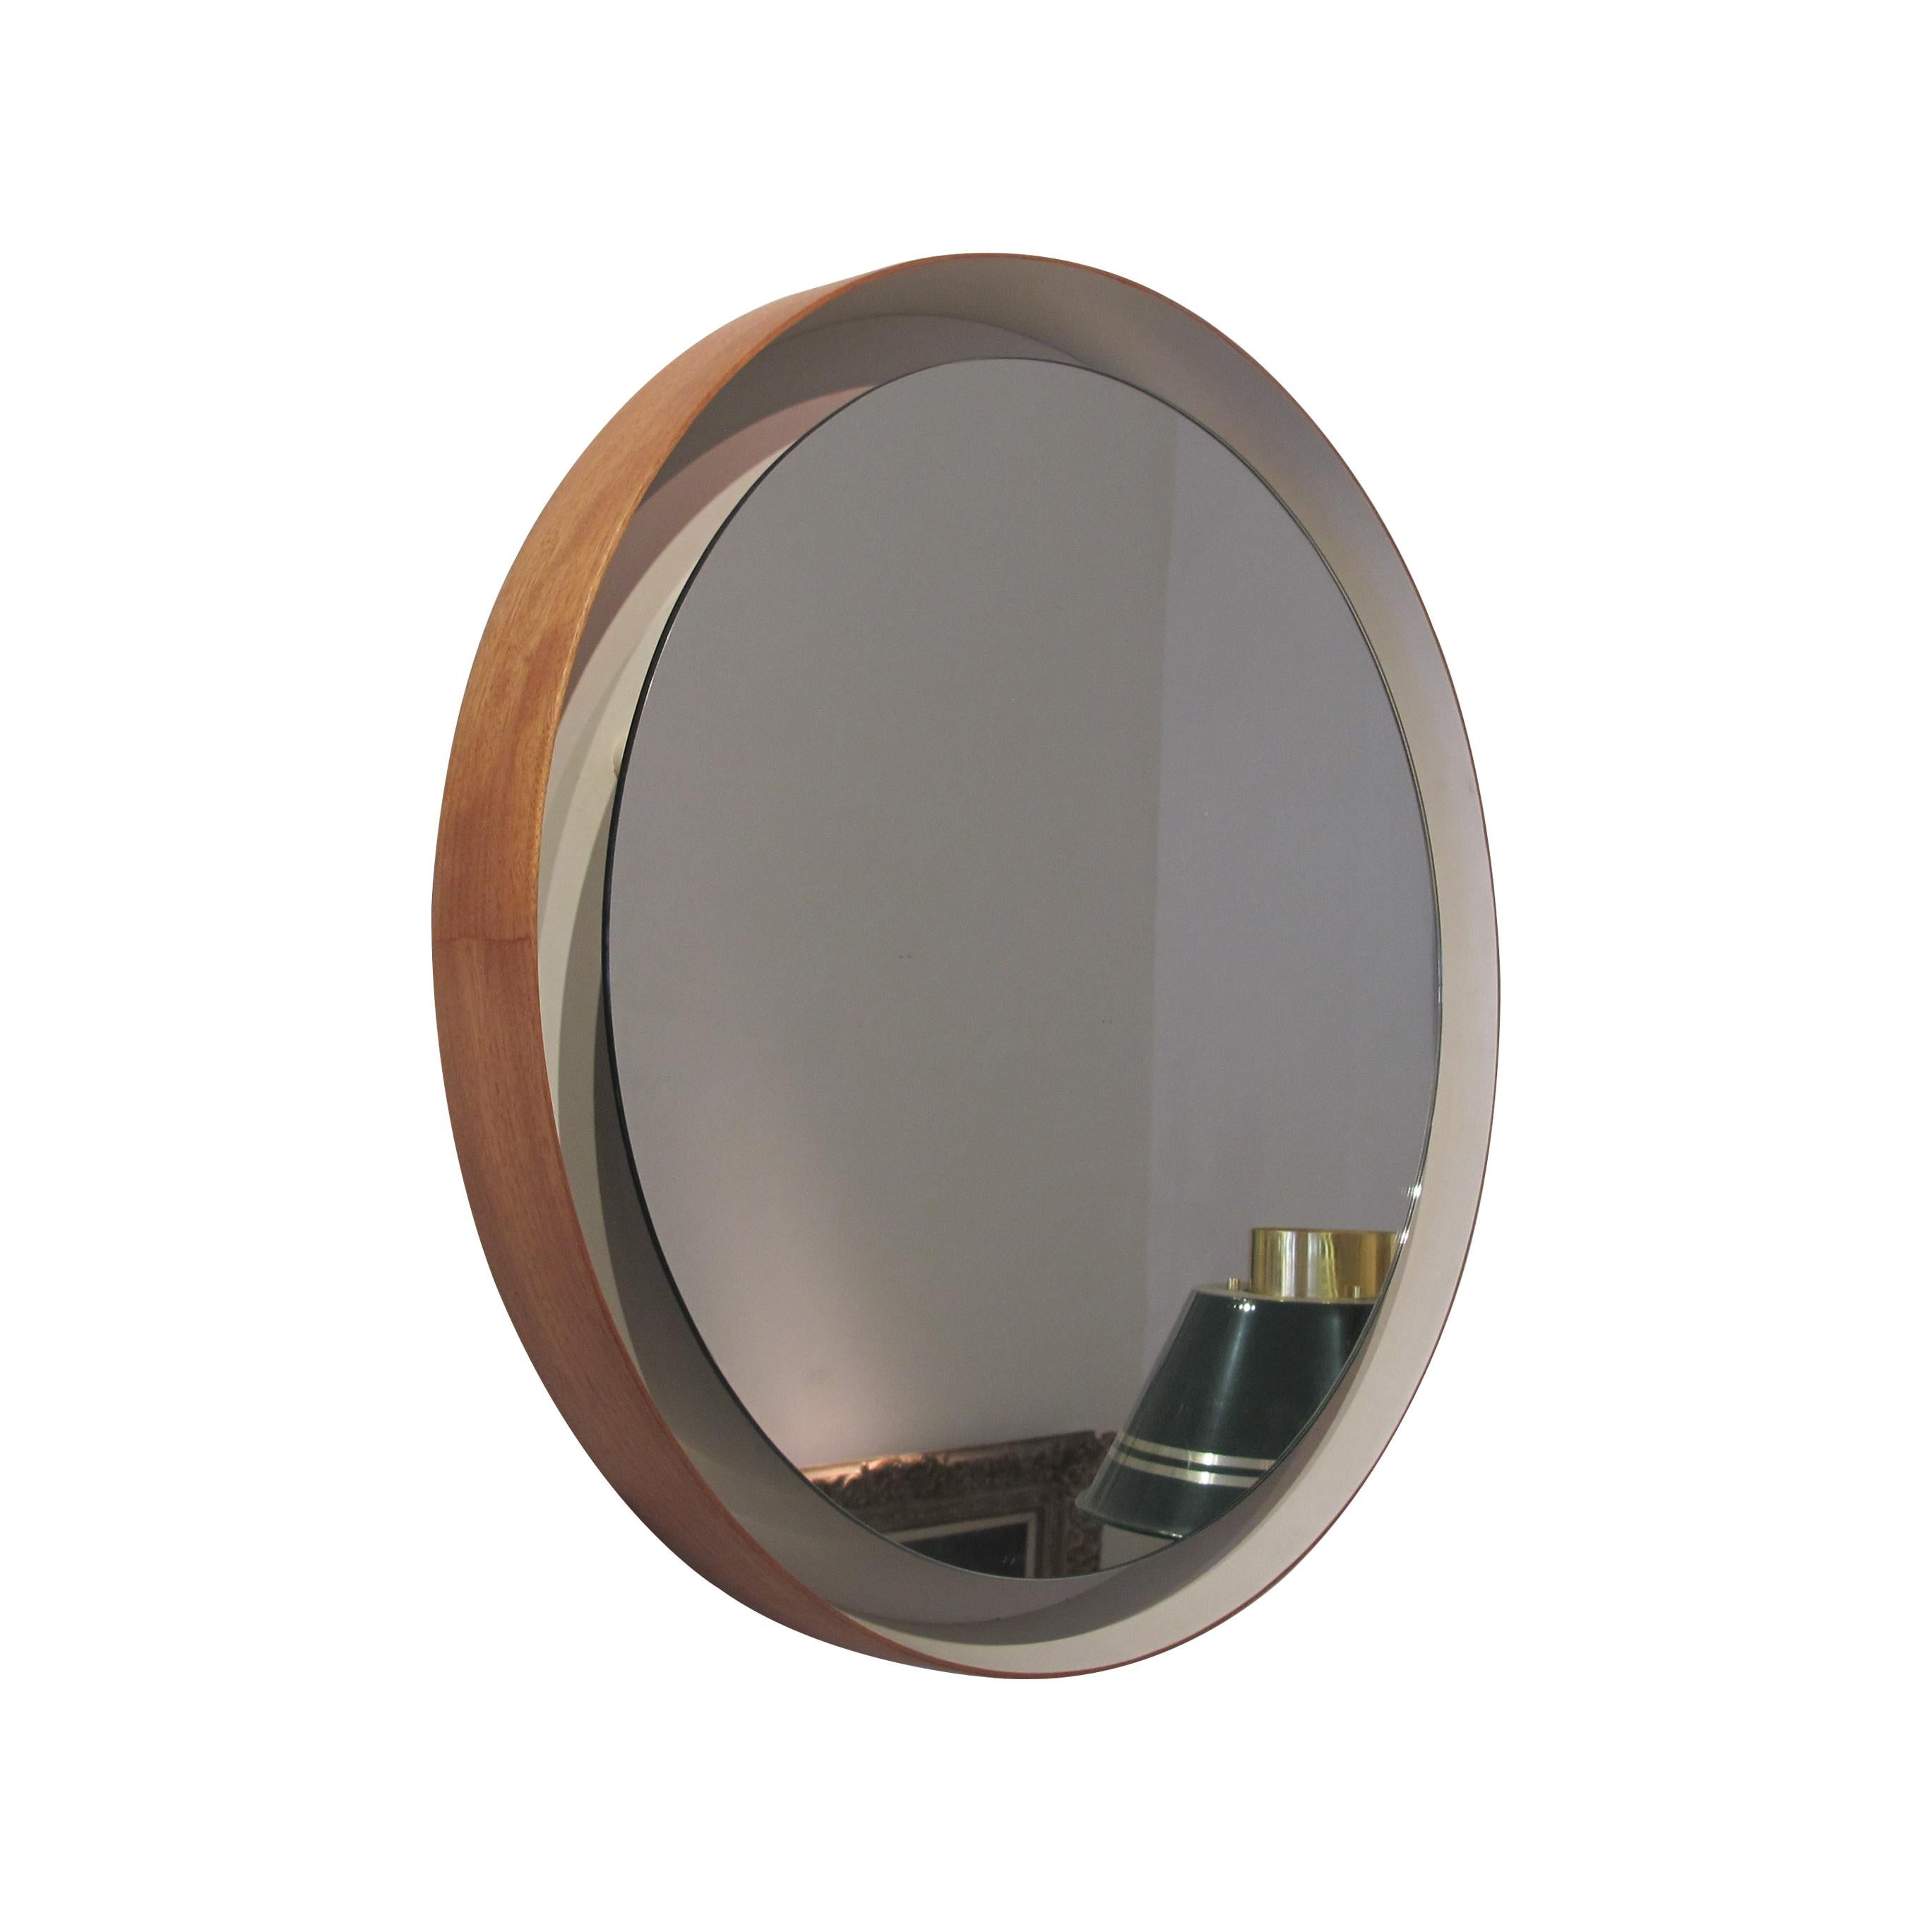 Mid-20th Century 1960s Belgian Wall Mounted Modernist Round Backlit Illuminated Wood Frame Mirror